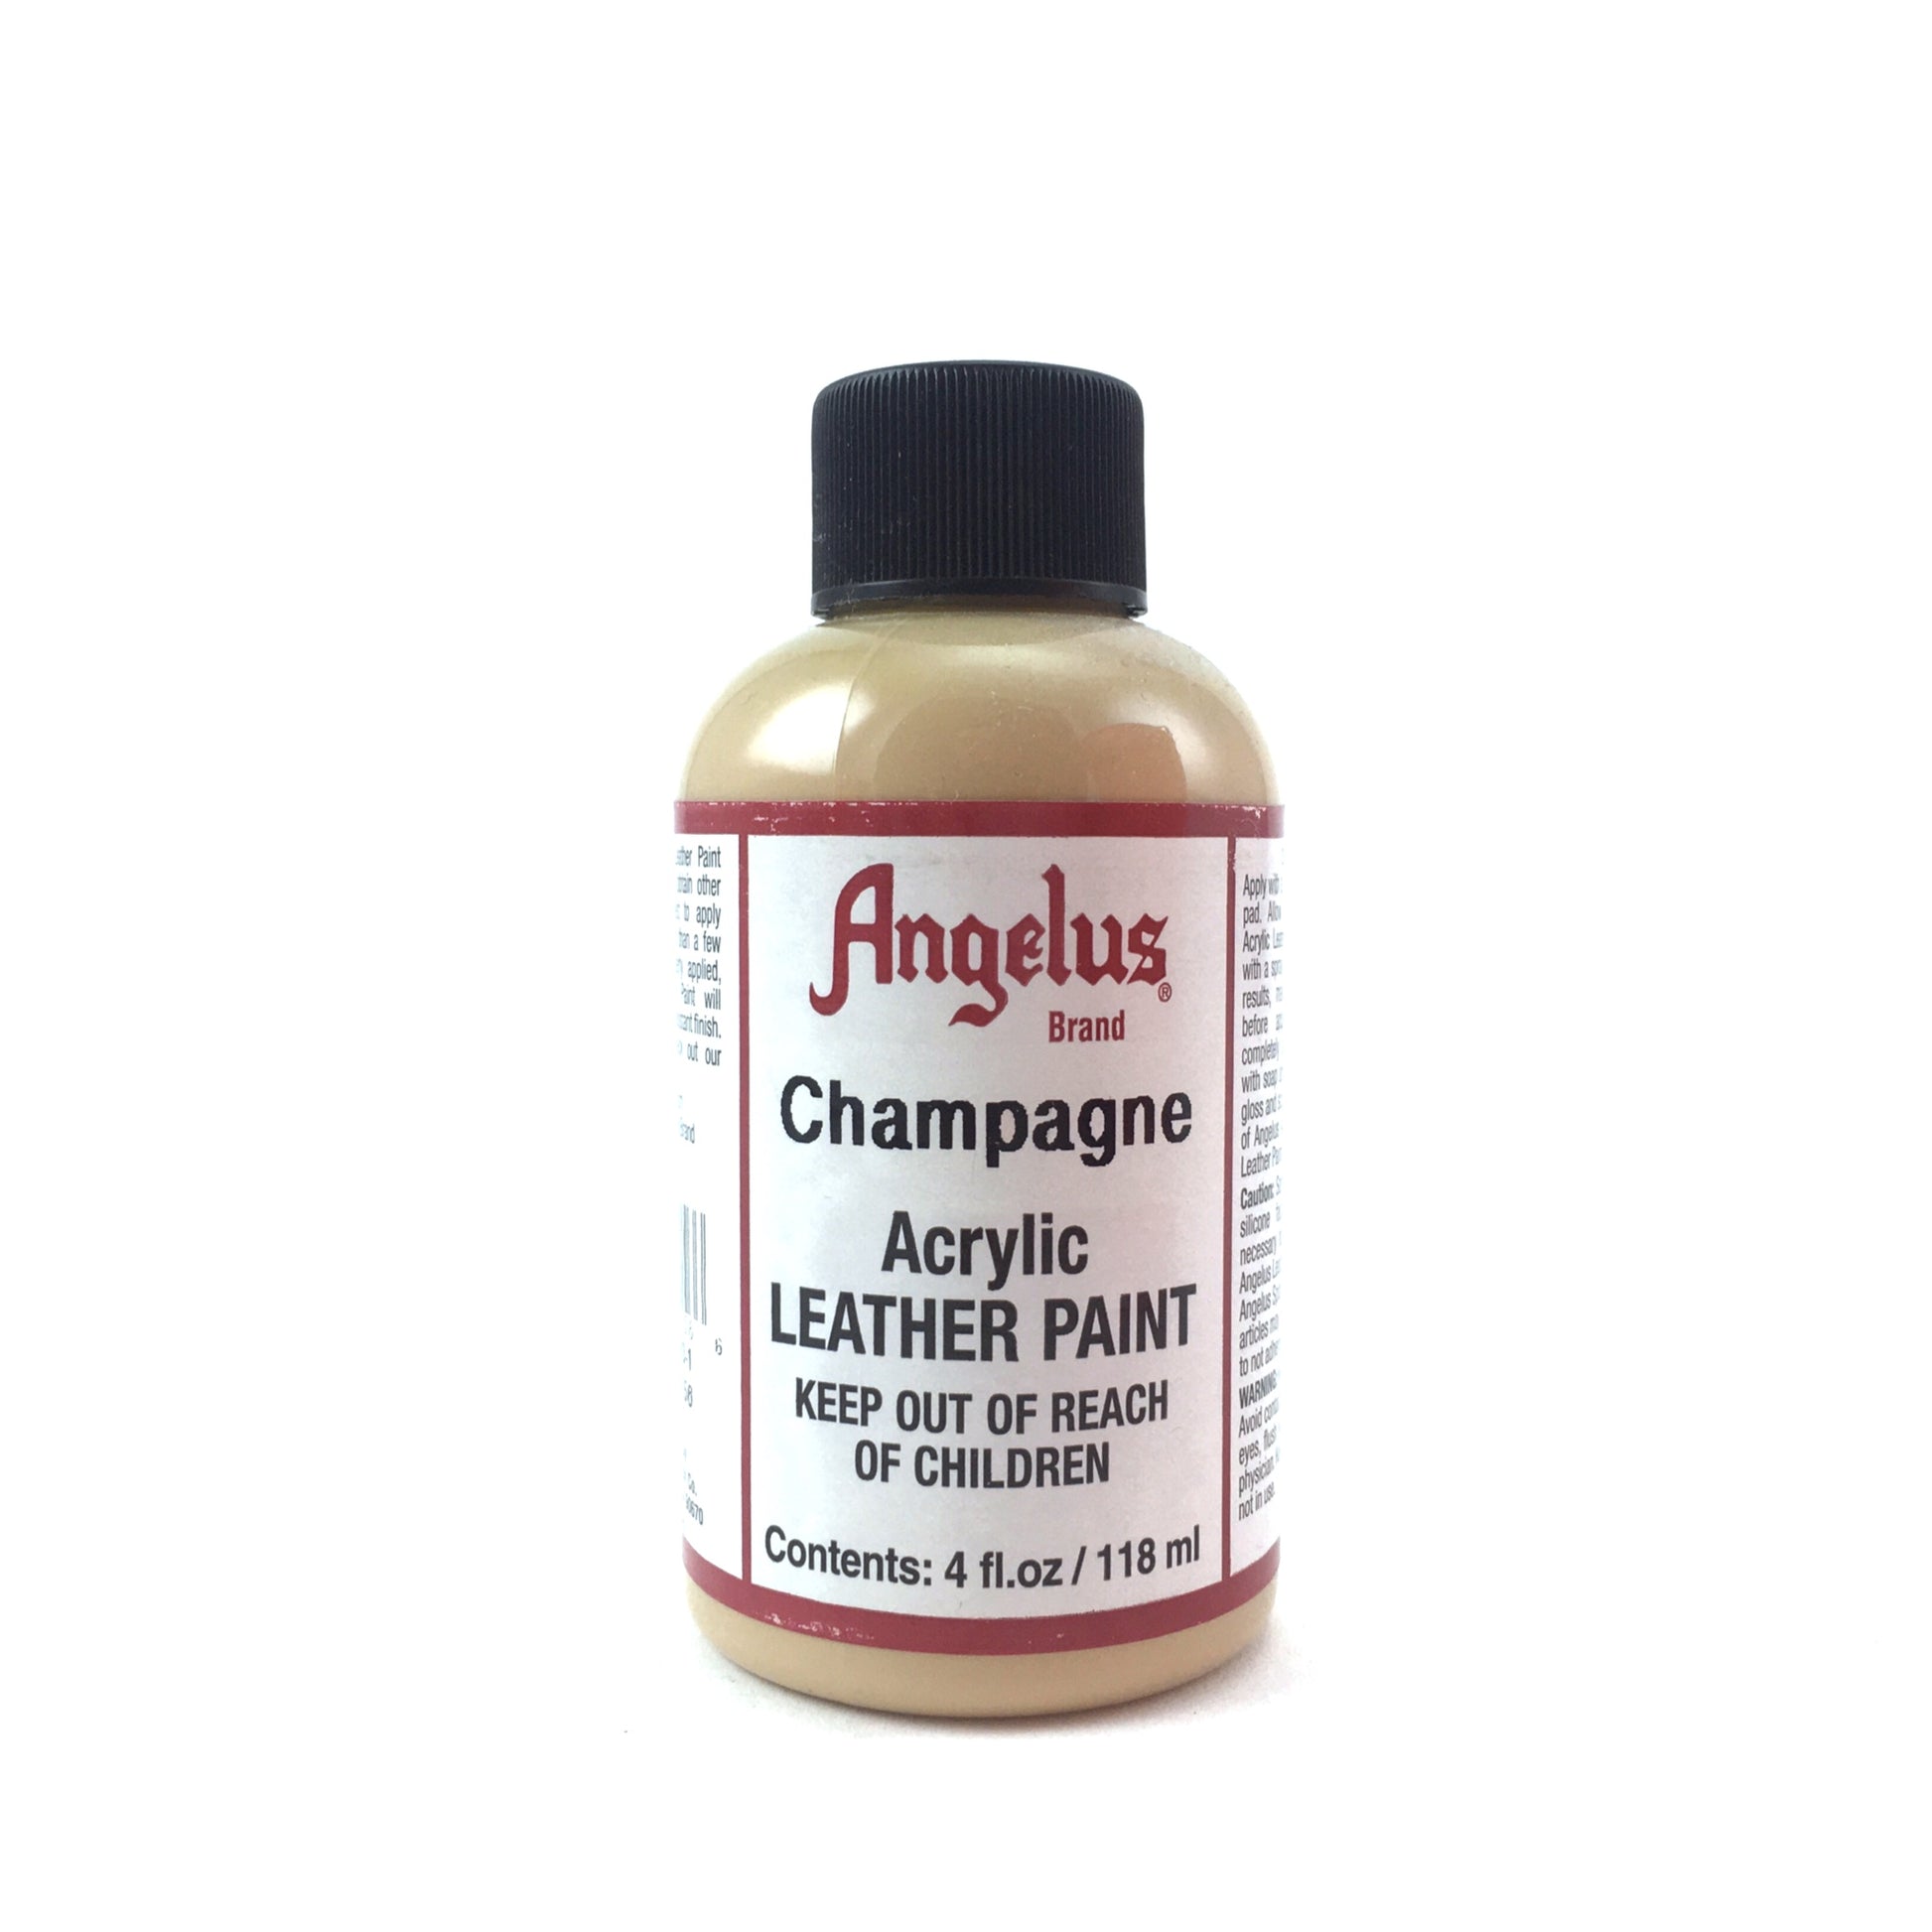 Angelus Acrylic Leather Paint - 4 oz. - Pearlescent Champagne by Angelus - K. A. Artist Shop